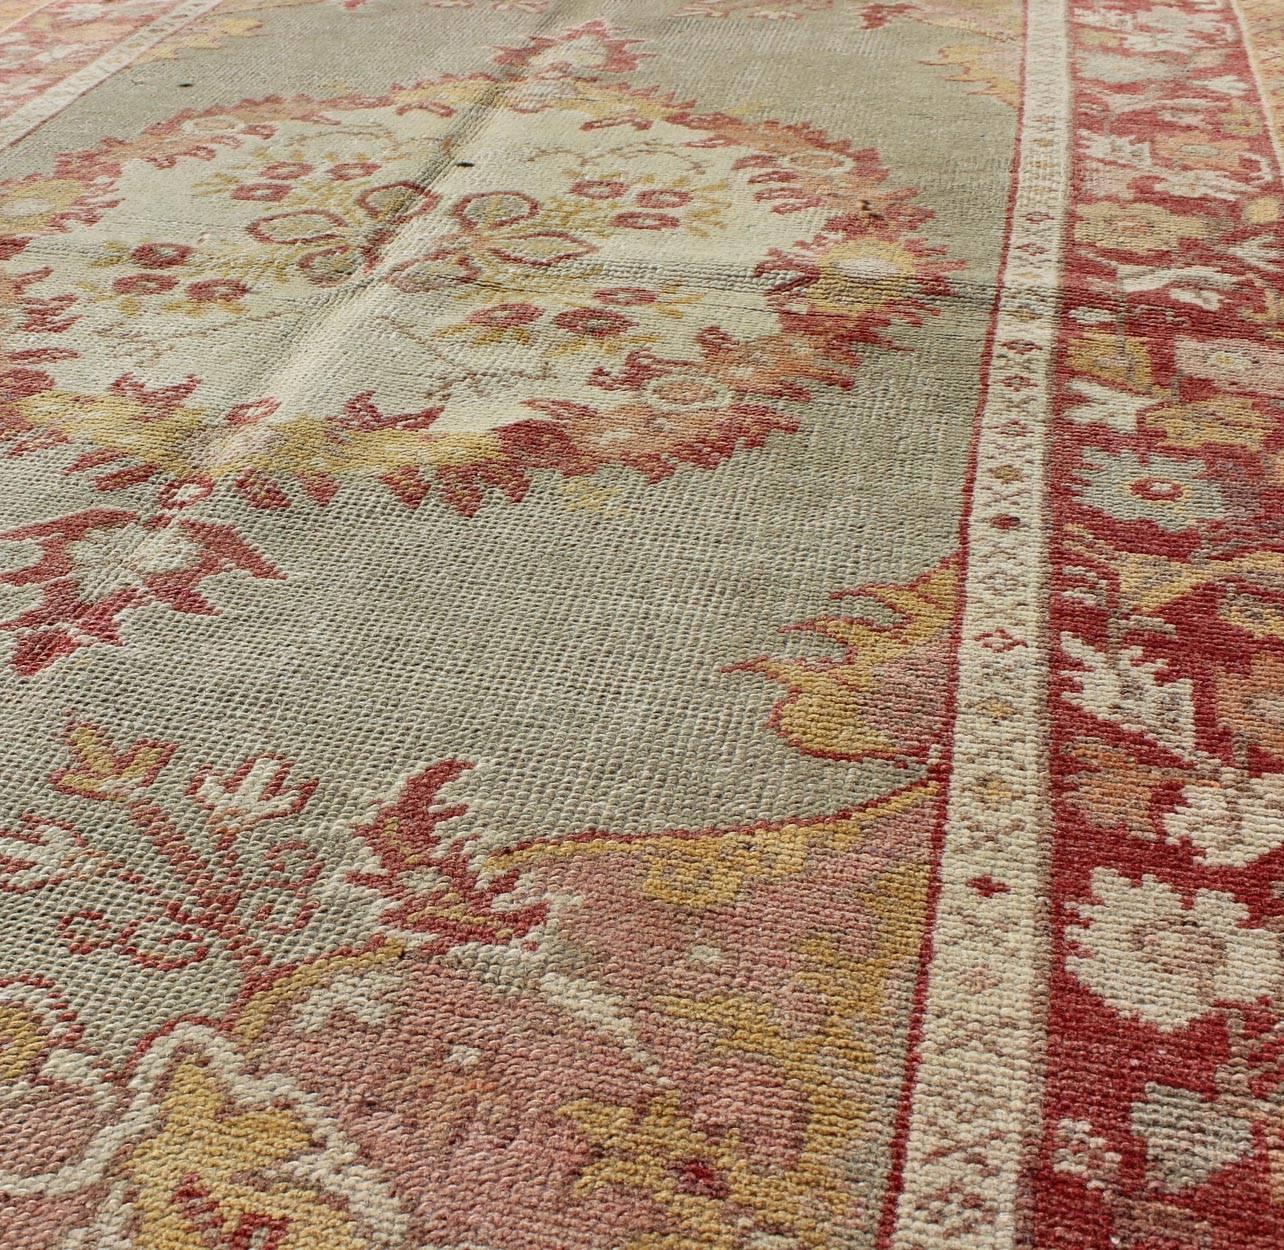 20th Century Turkish Oushak Vintage Rug with Floral Medallion Design in Red and Light Blue For Sale